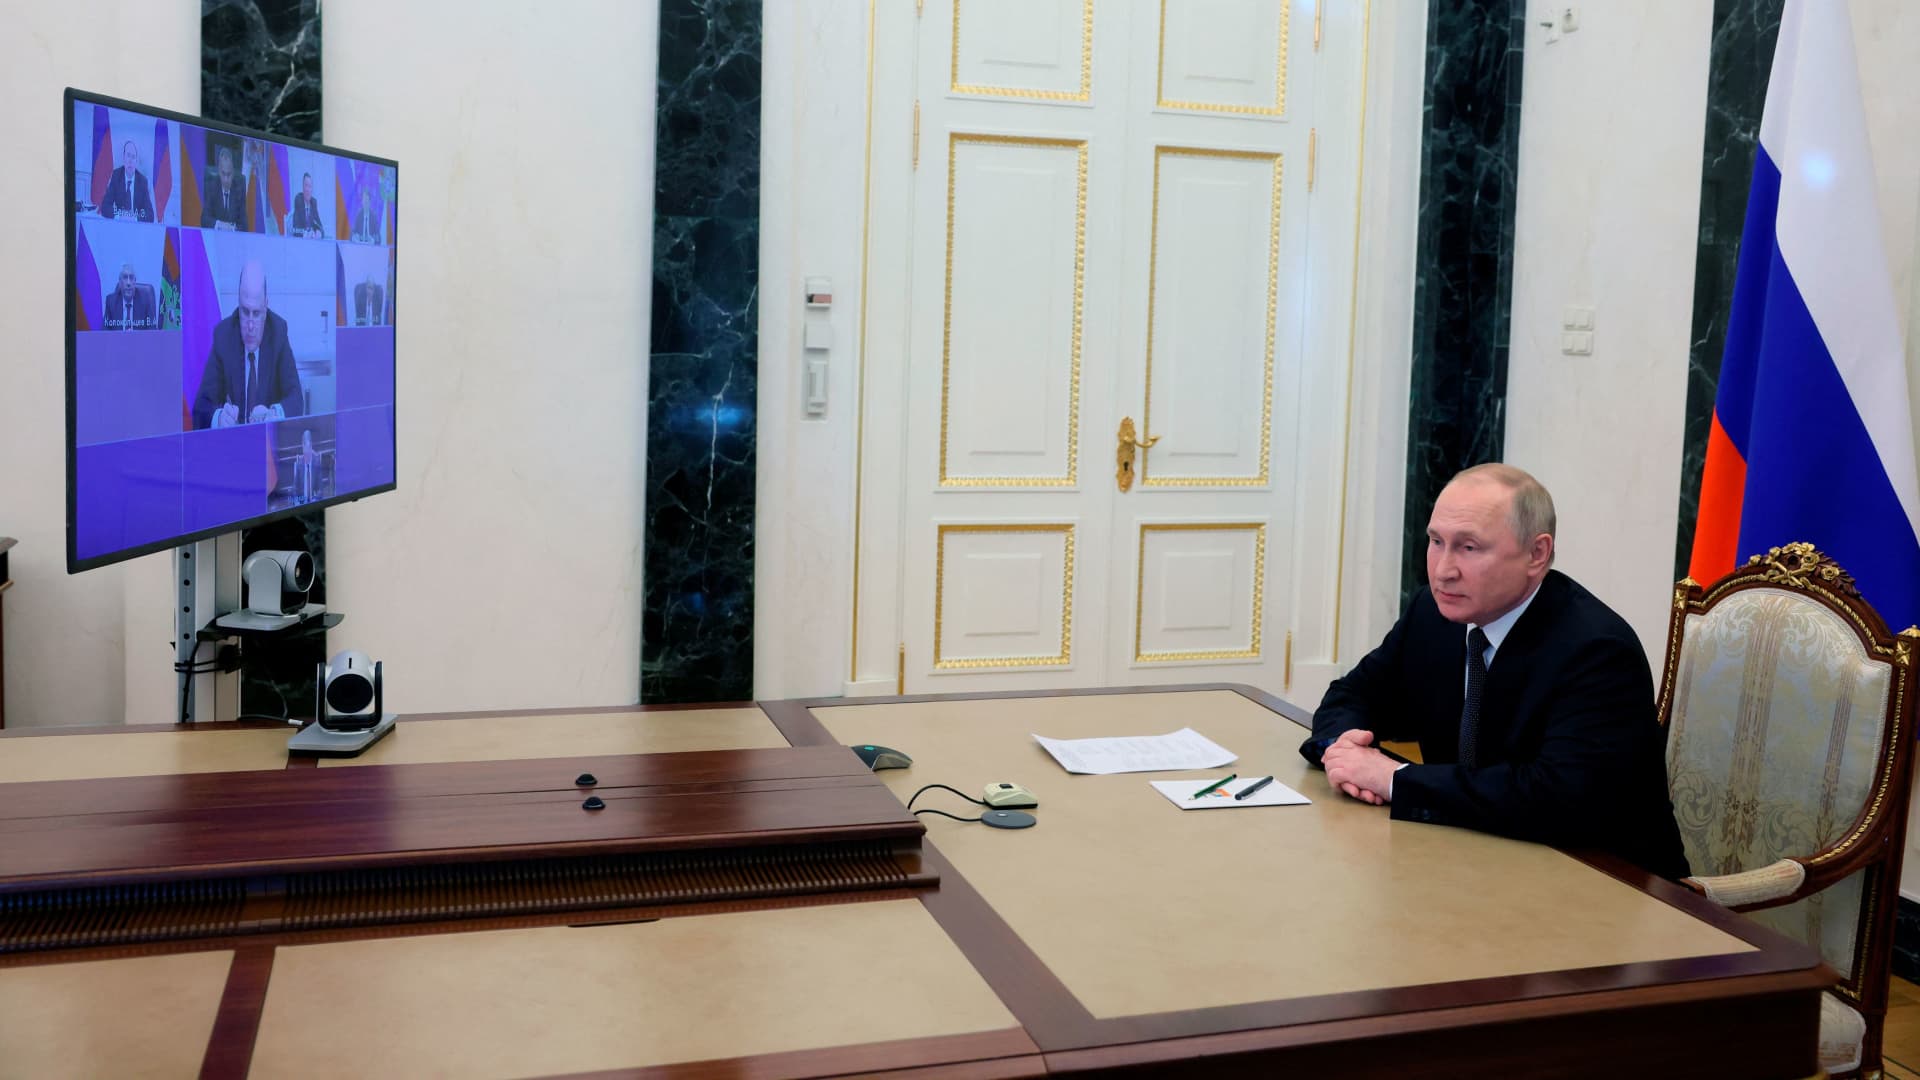 Russian President Vladimir Putin chairs a meeting with members of the Security Council via a video link in Moscow, Russia May 13, 2022. Sputnik/Mikhail Metzel/Kremlin via REUTERS ATTENTION EDITORS - THIS IMAGE WAS PROVIDED BY A THIRD PARTY.